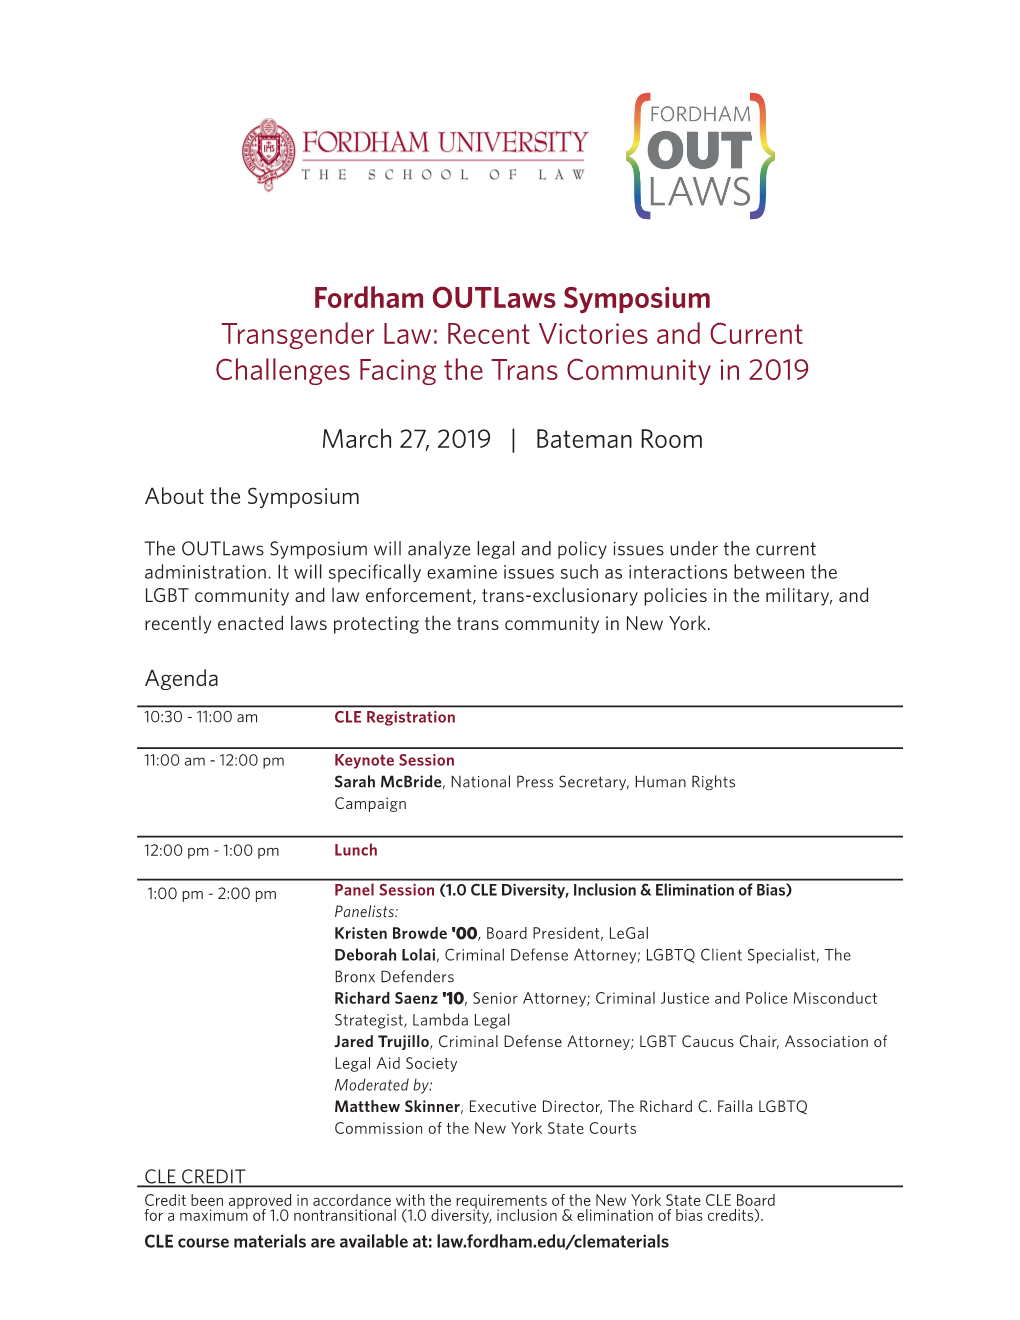 Fordham Outlaws Symposium Transgender Law: Recent Victories and Current Challenges Facing the Trans Community in 2019